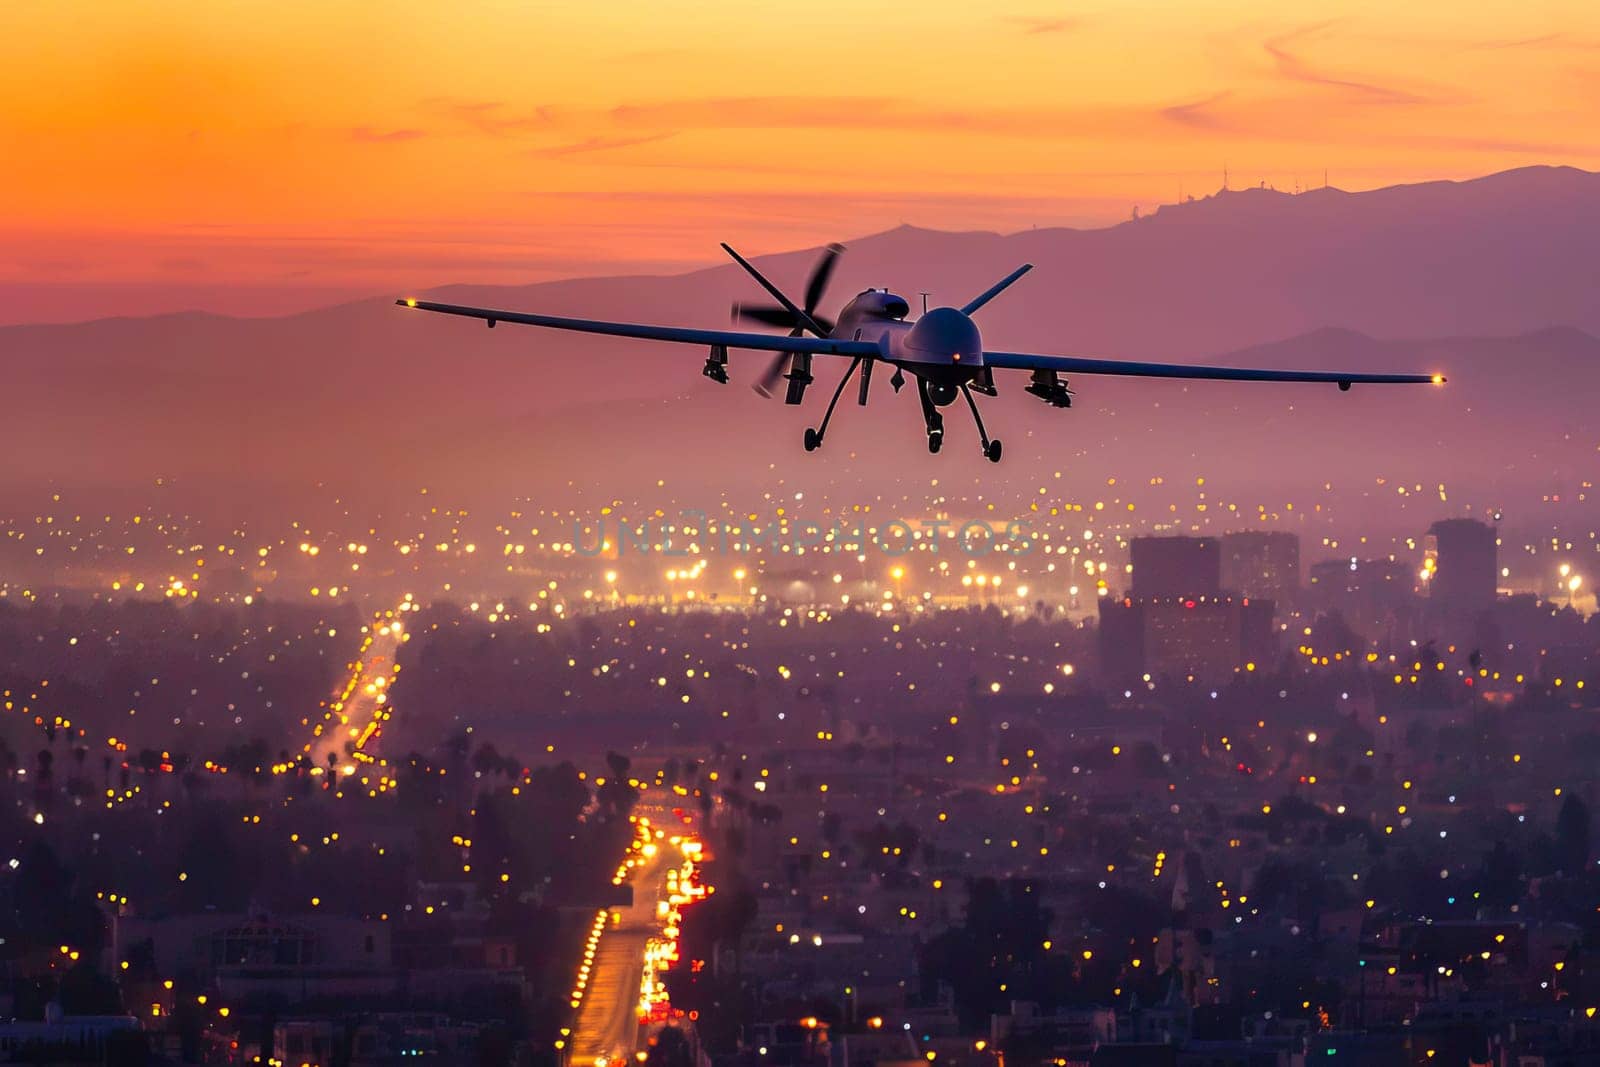 Military unmanned airplane flies over a city at night, illuminating the urban landscape below with its lights.